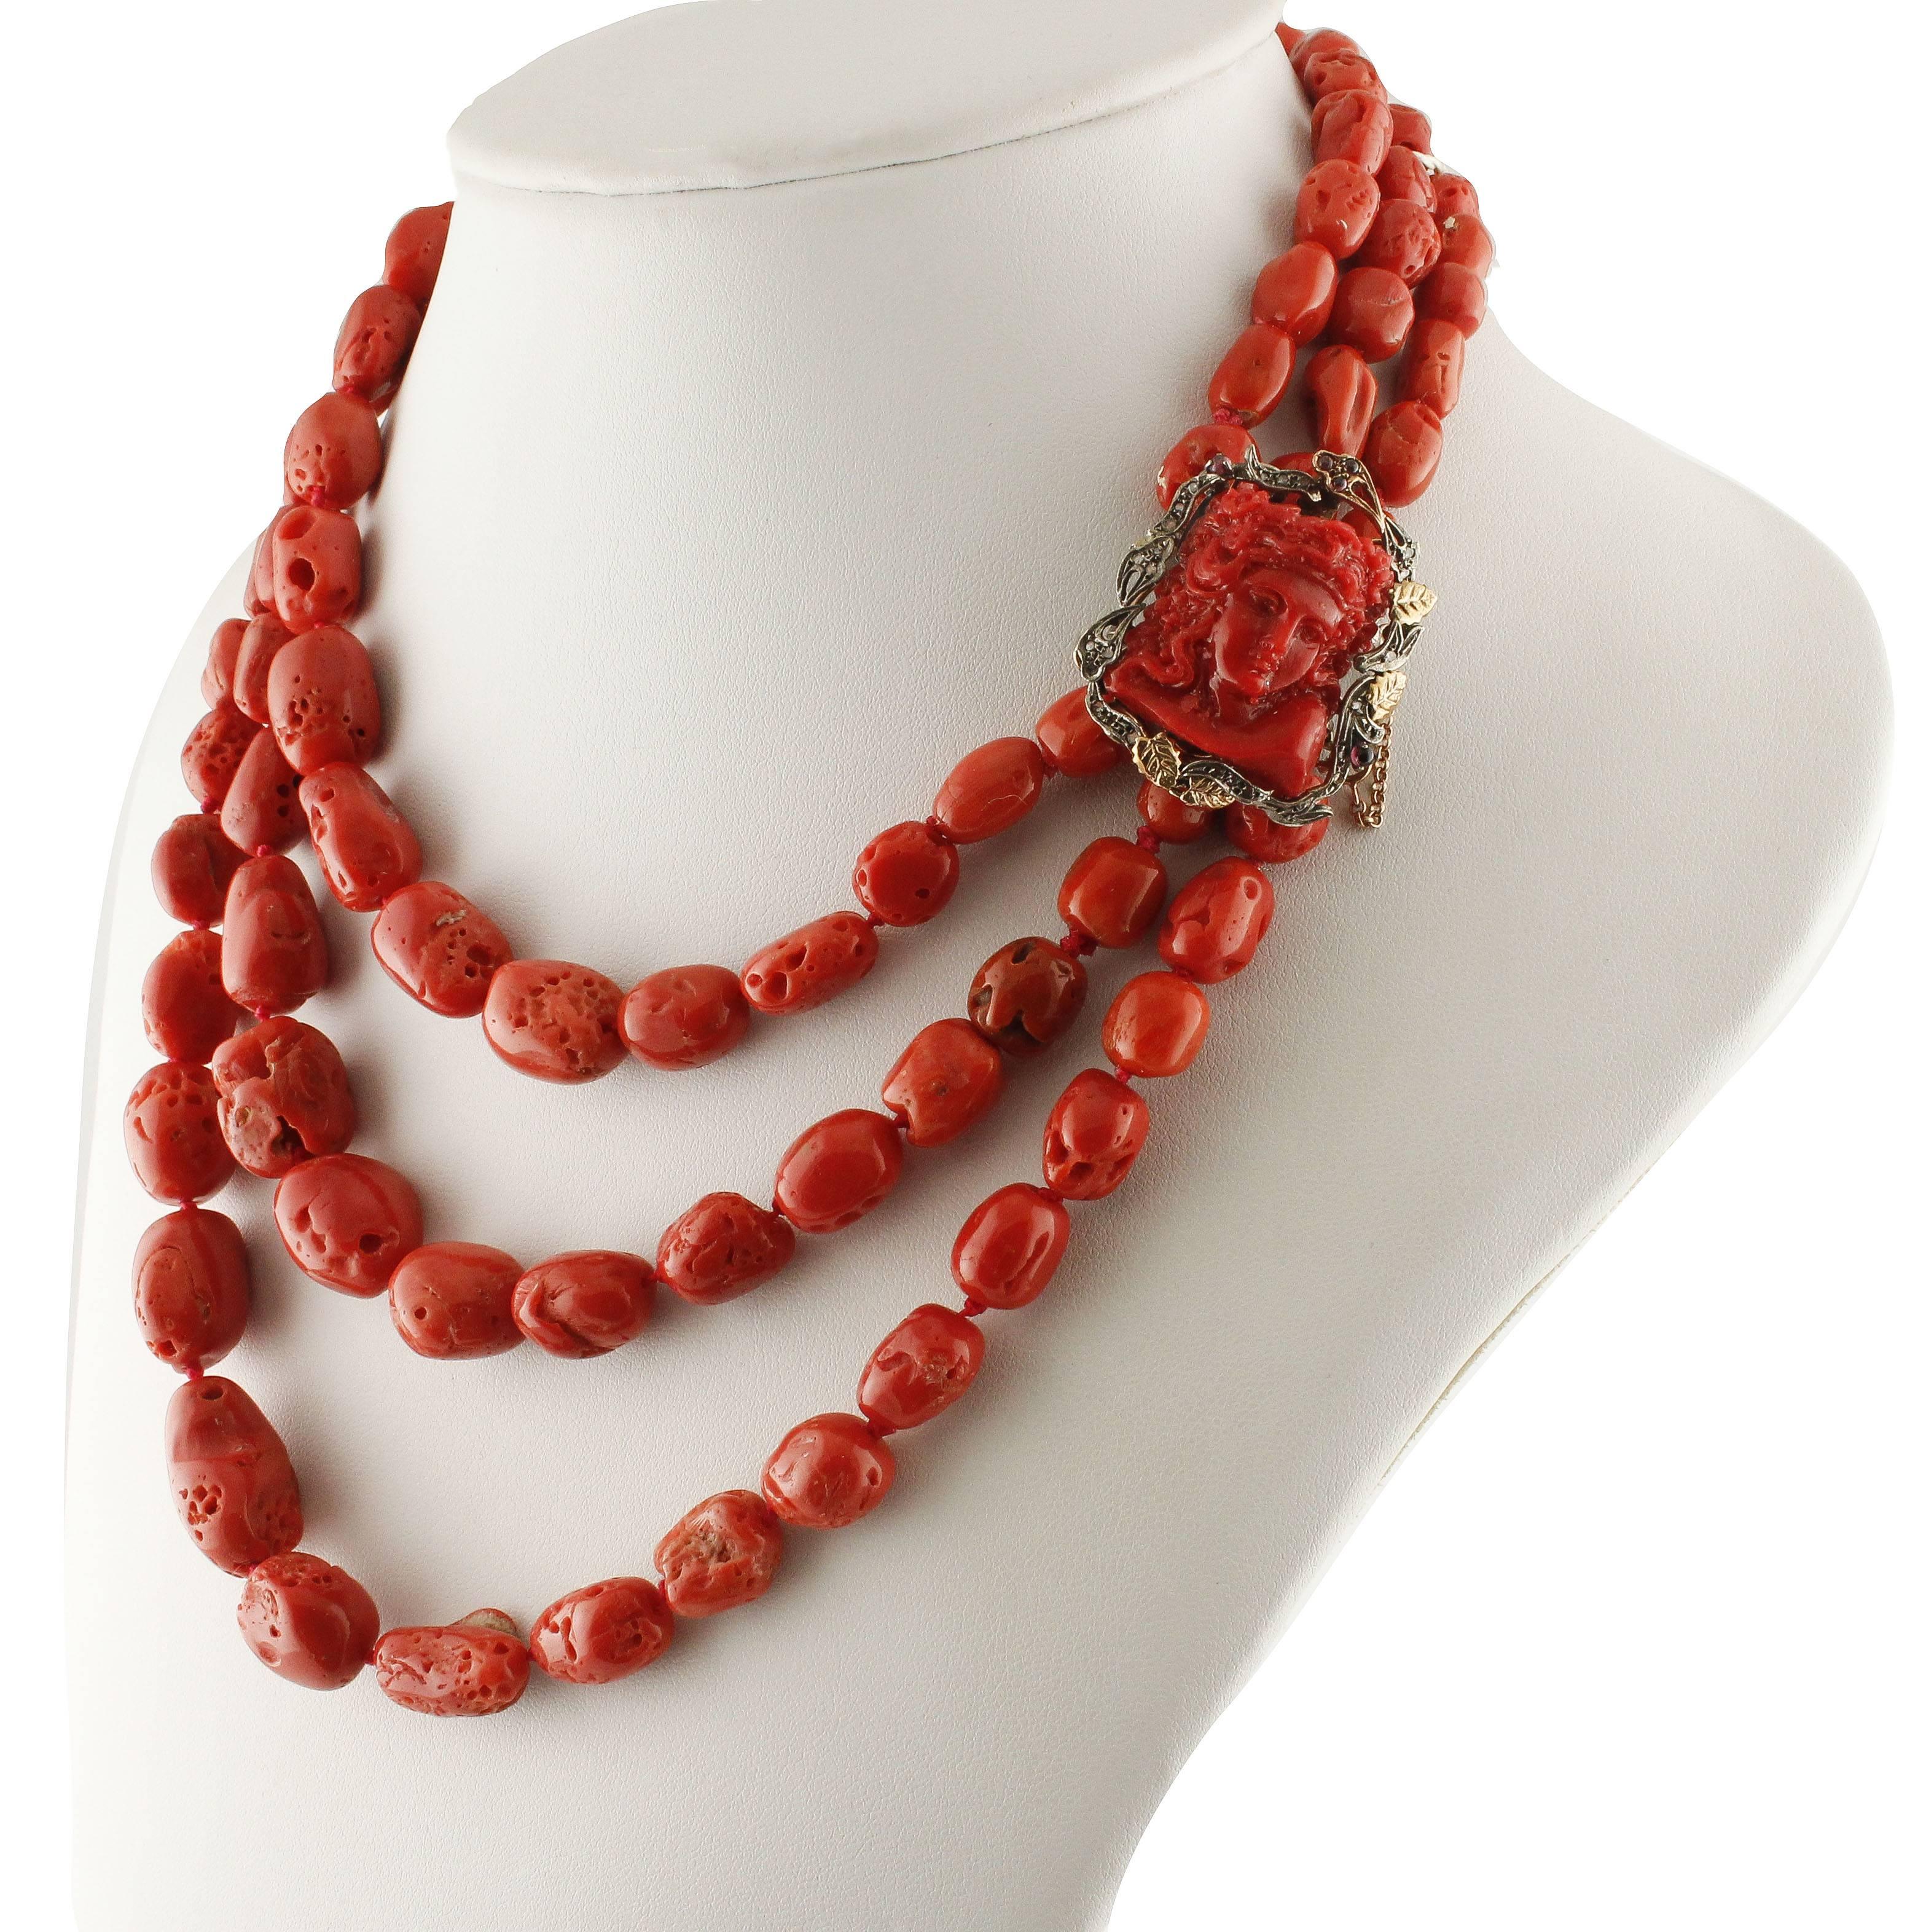 SHIPPING POLICY:
No additional costs will be added to this order.
Shipping costs will be totally covered by the seller (customs duties included).

For any inquiries,please contact the seller through the message center.

Wonderful coral necklace with